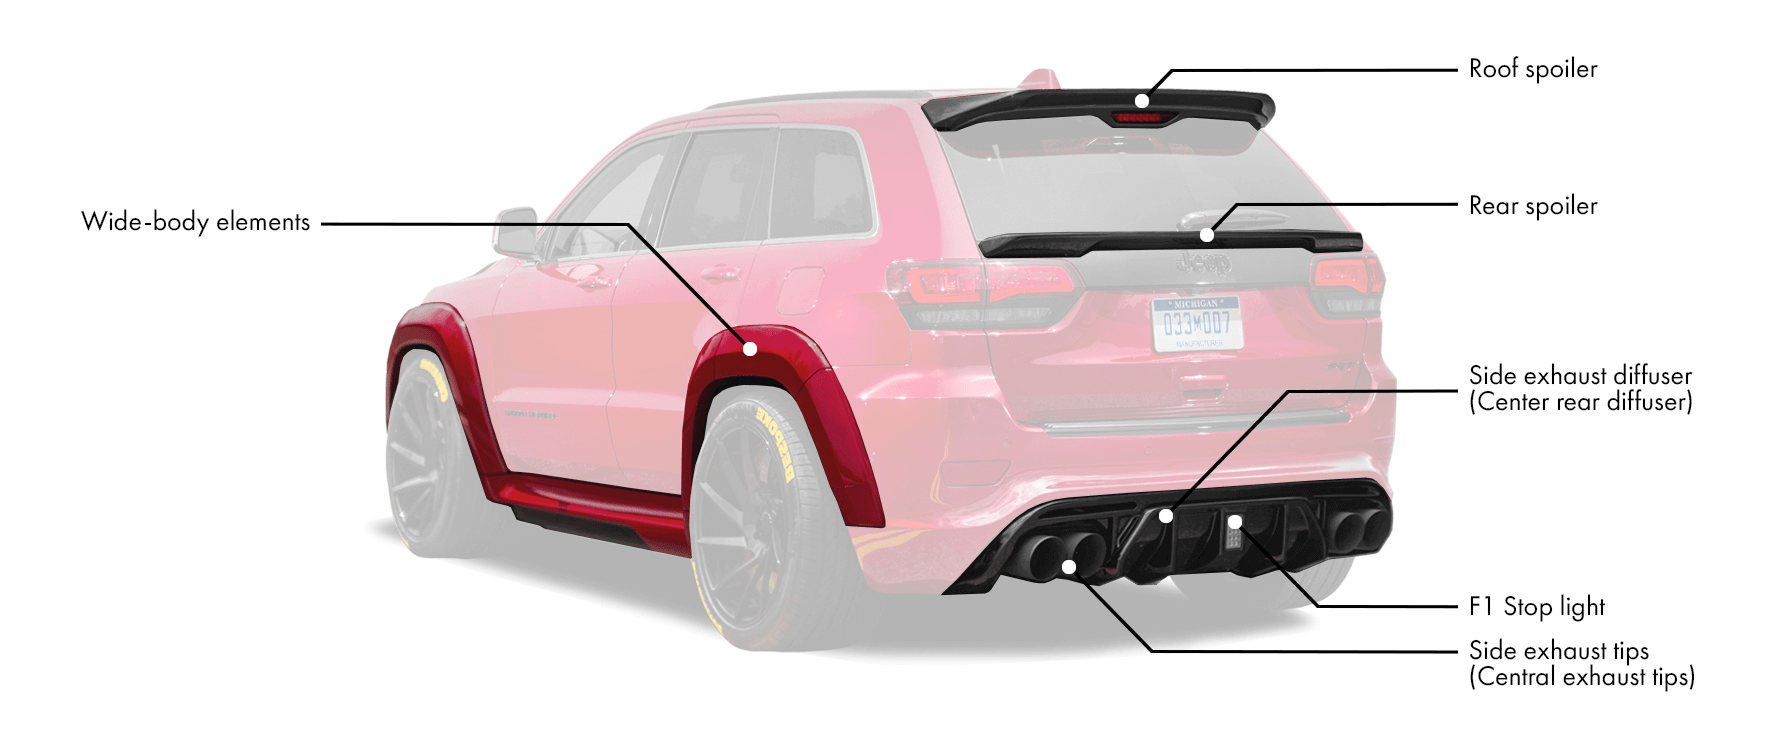 Jeep Grand Cherokee WK2 Body kit includes